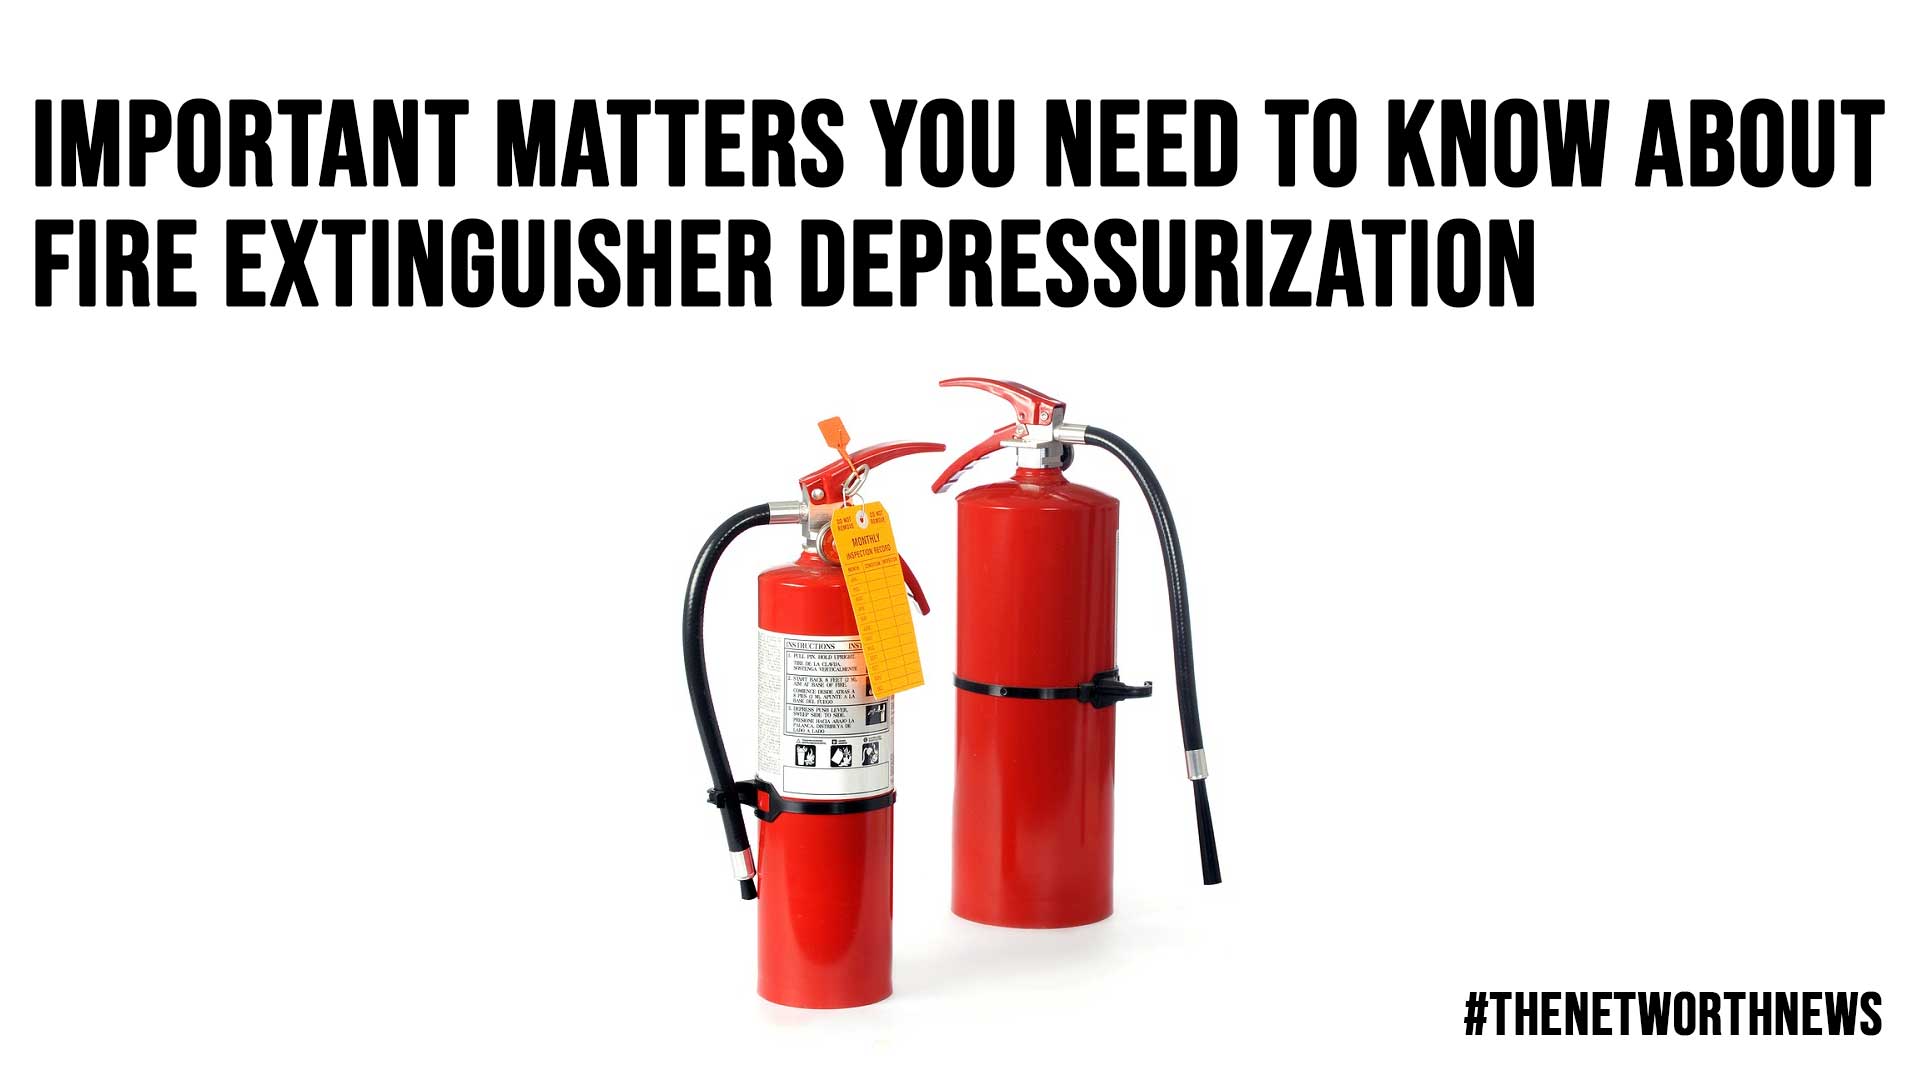 Important Matters You Need to Know About Fire Extinguisher Depressurization